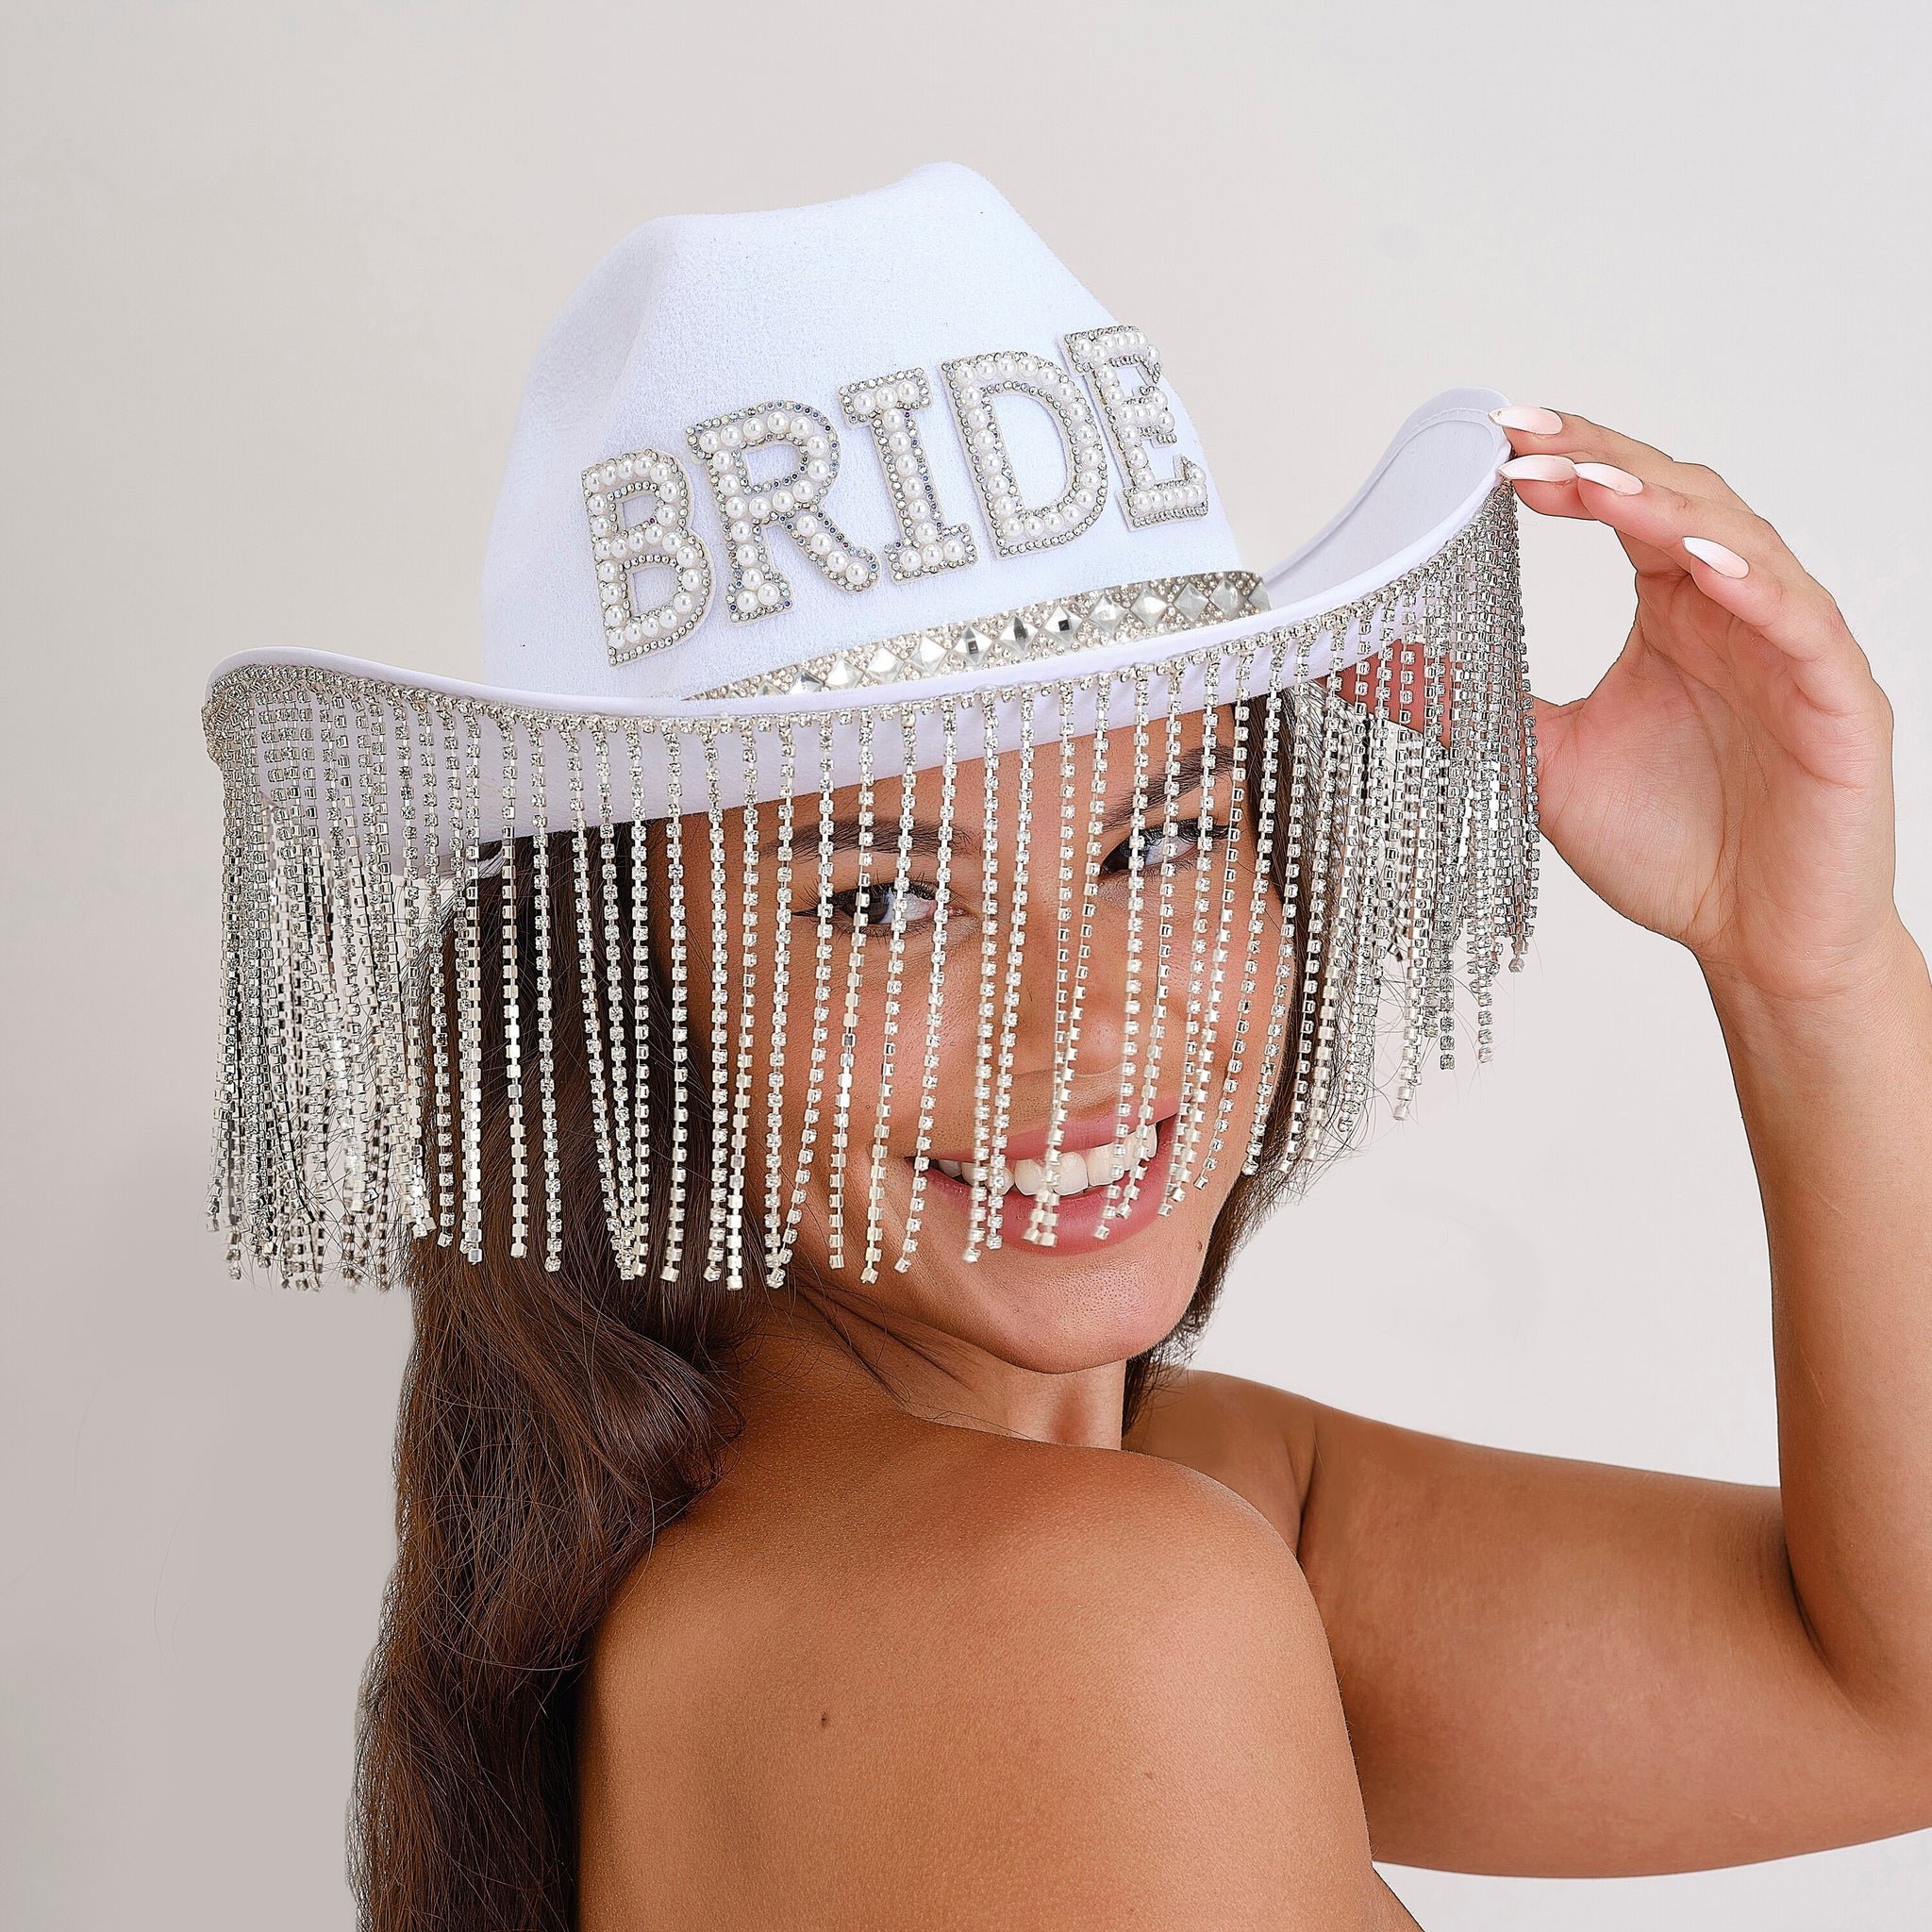 Hen party cowgirl hat